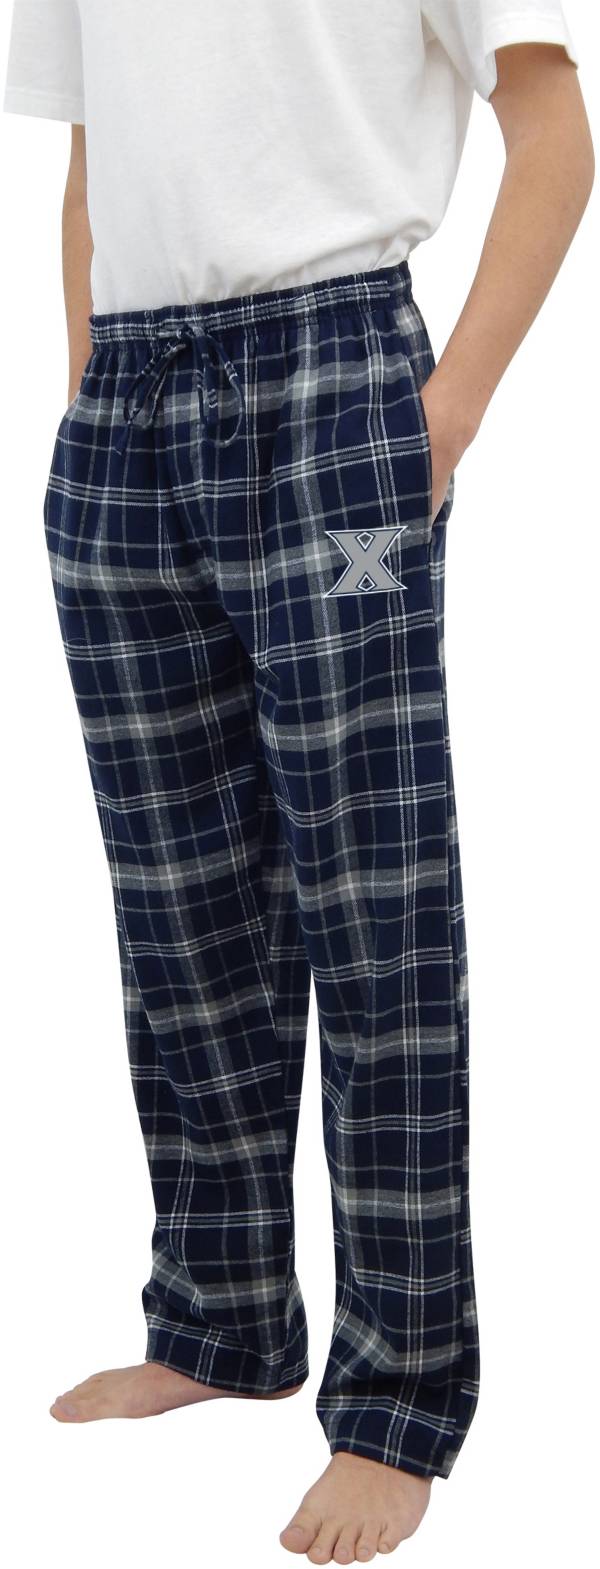 Concepts Sport Men's Xavier Musketeers Blue Ultimate Embroidered Sleep Pants product image